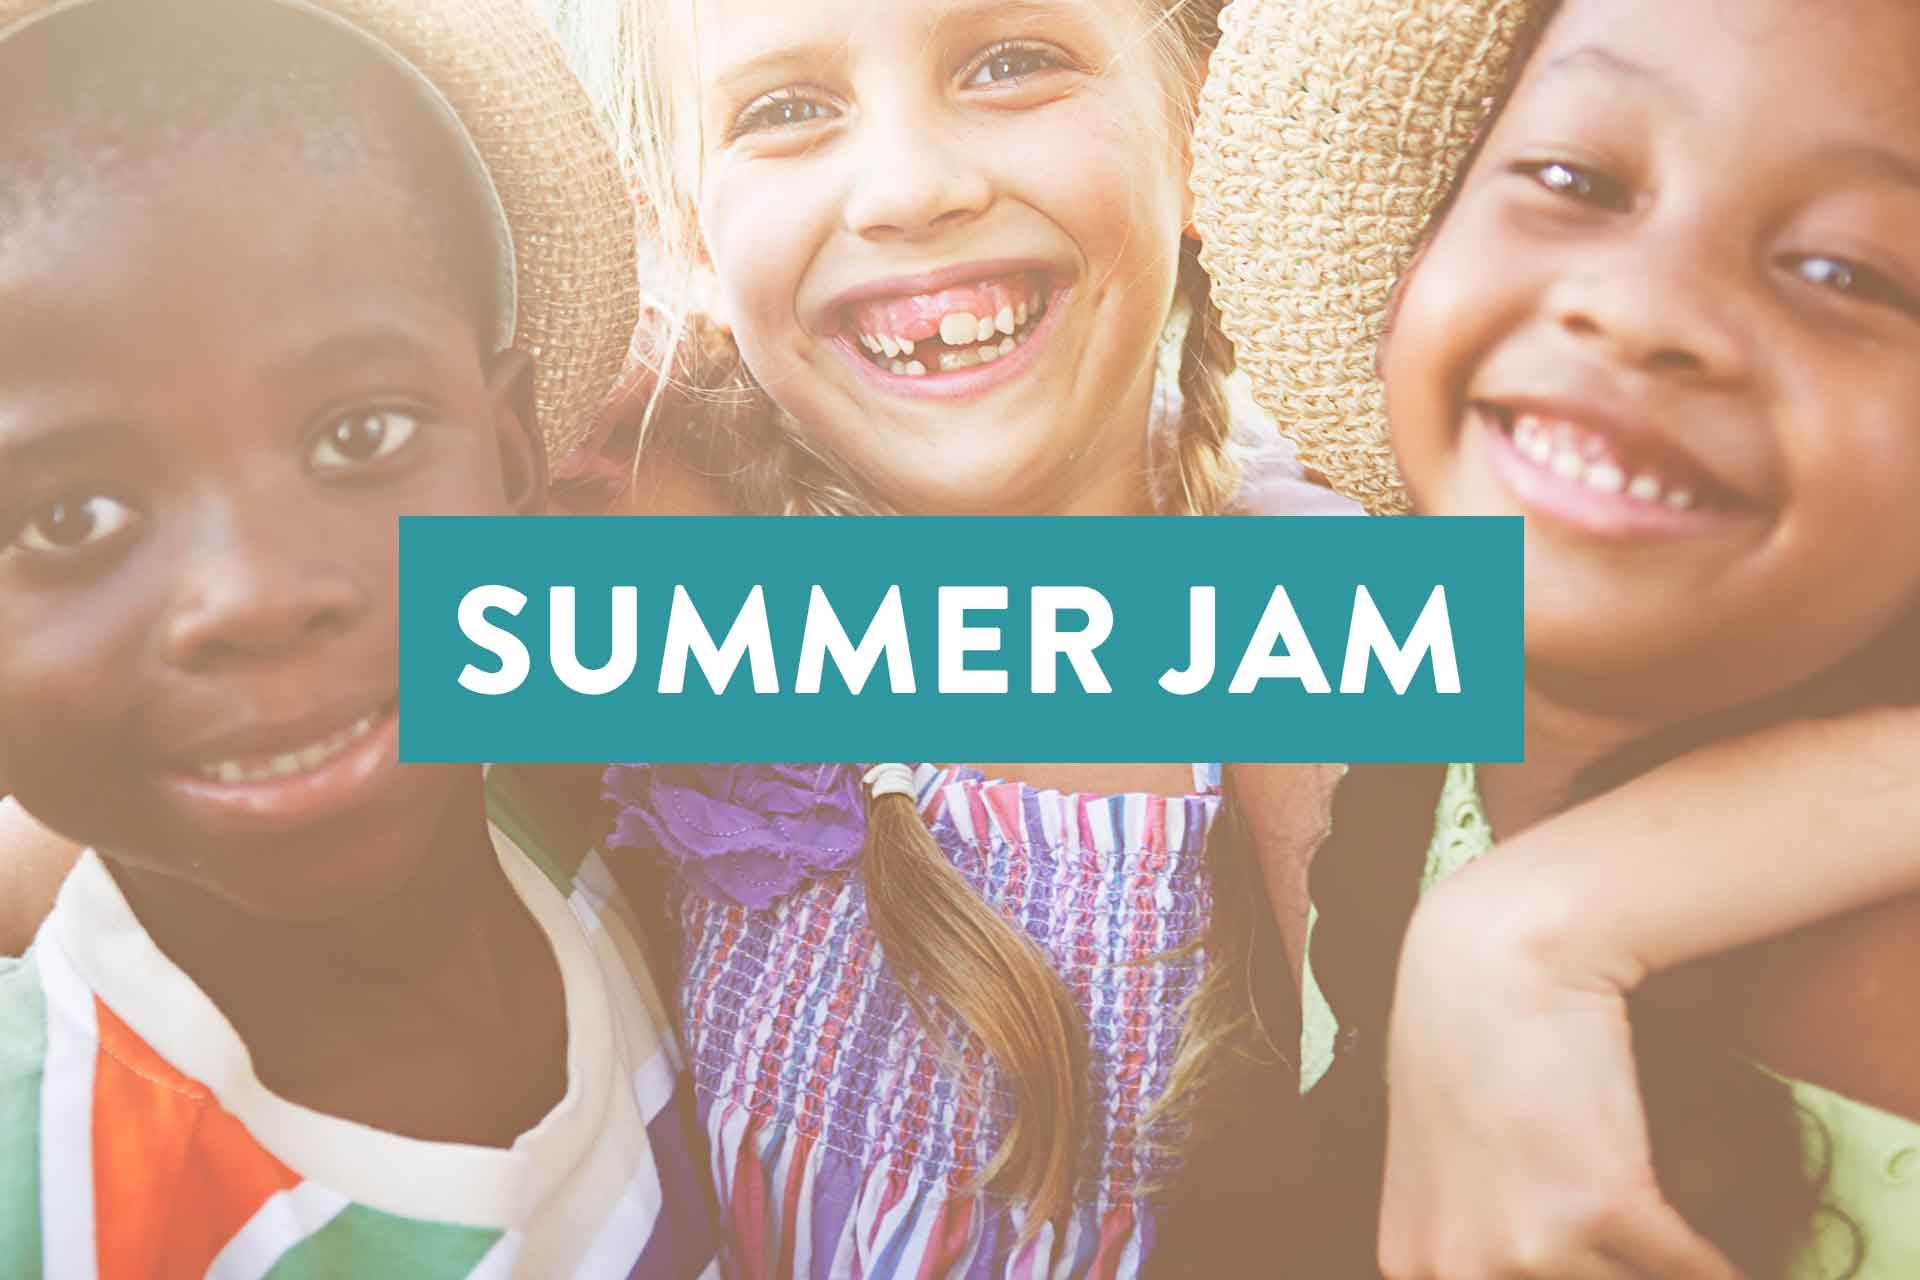 Link to Summer Jam detail page